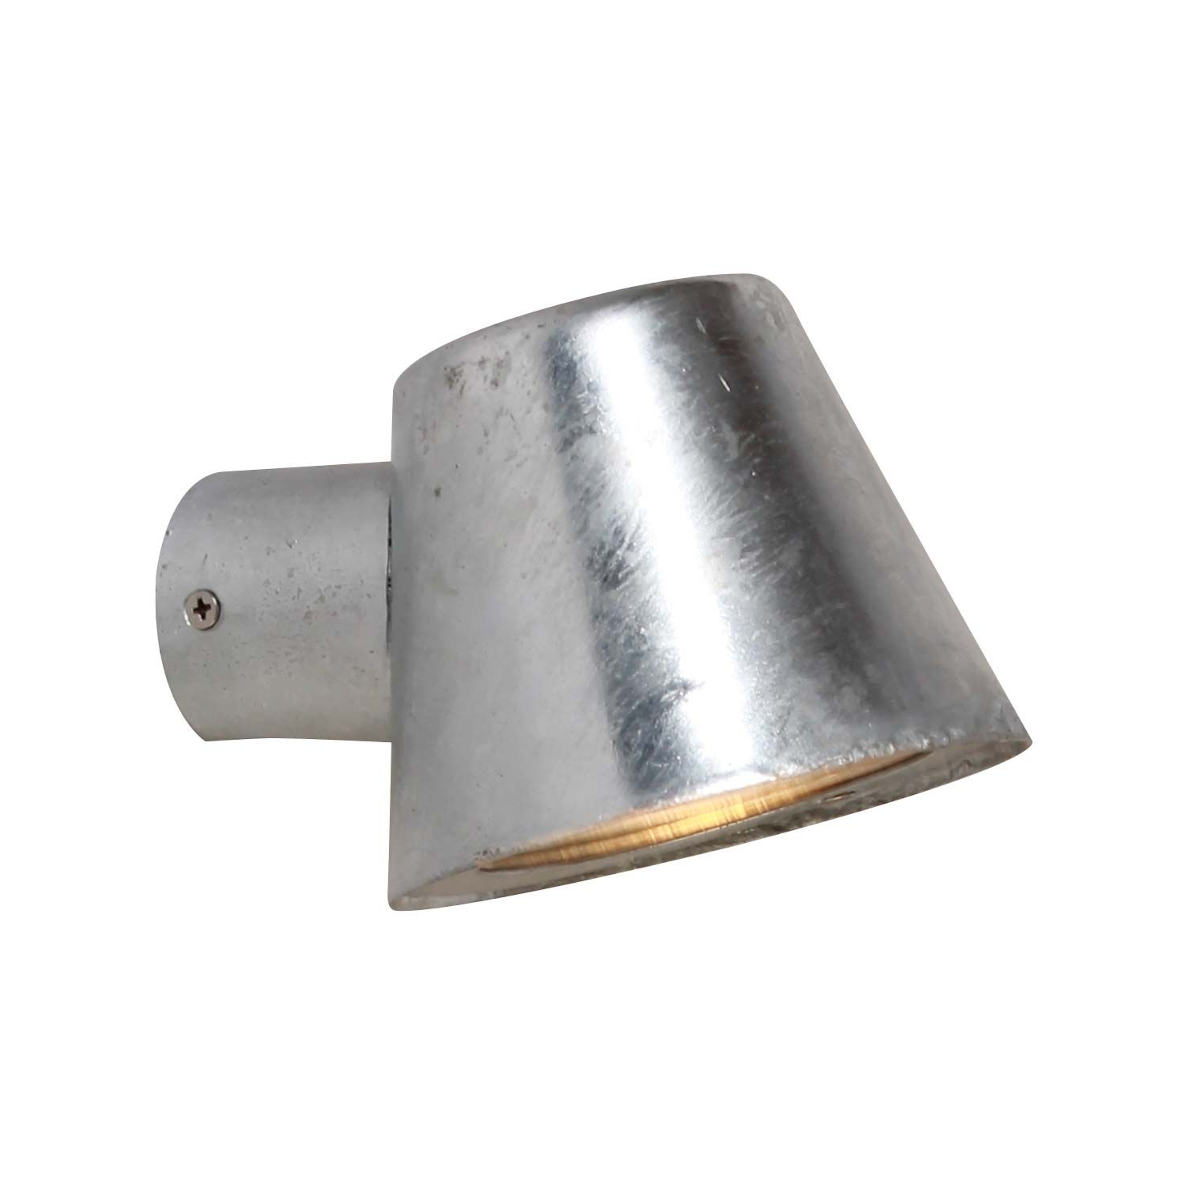 Product image of Skopa Galvanised Wall Down Light for Home exterior